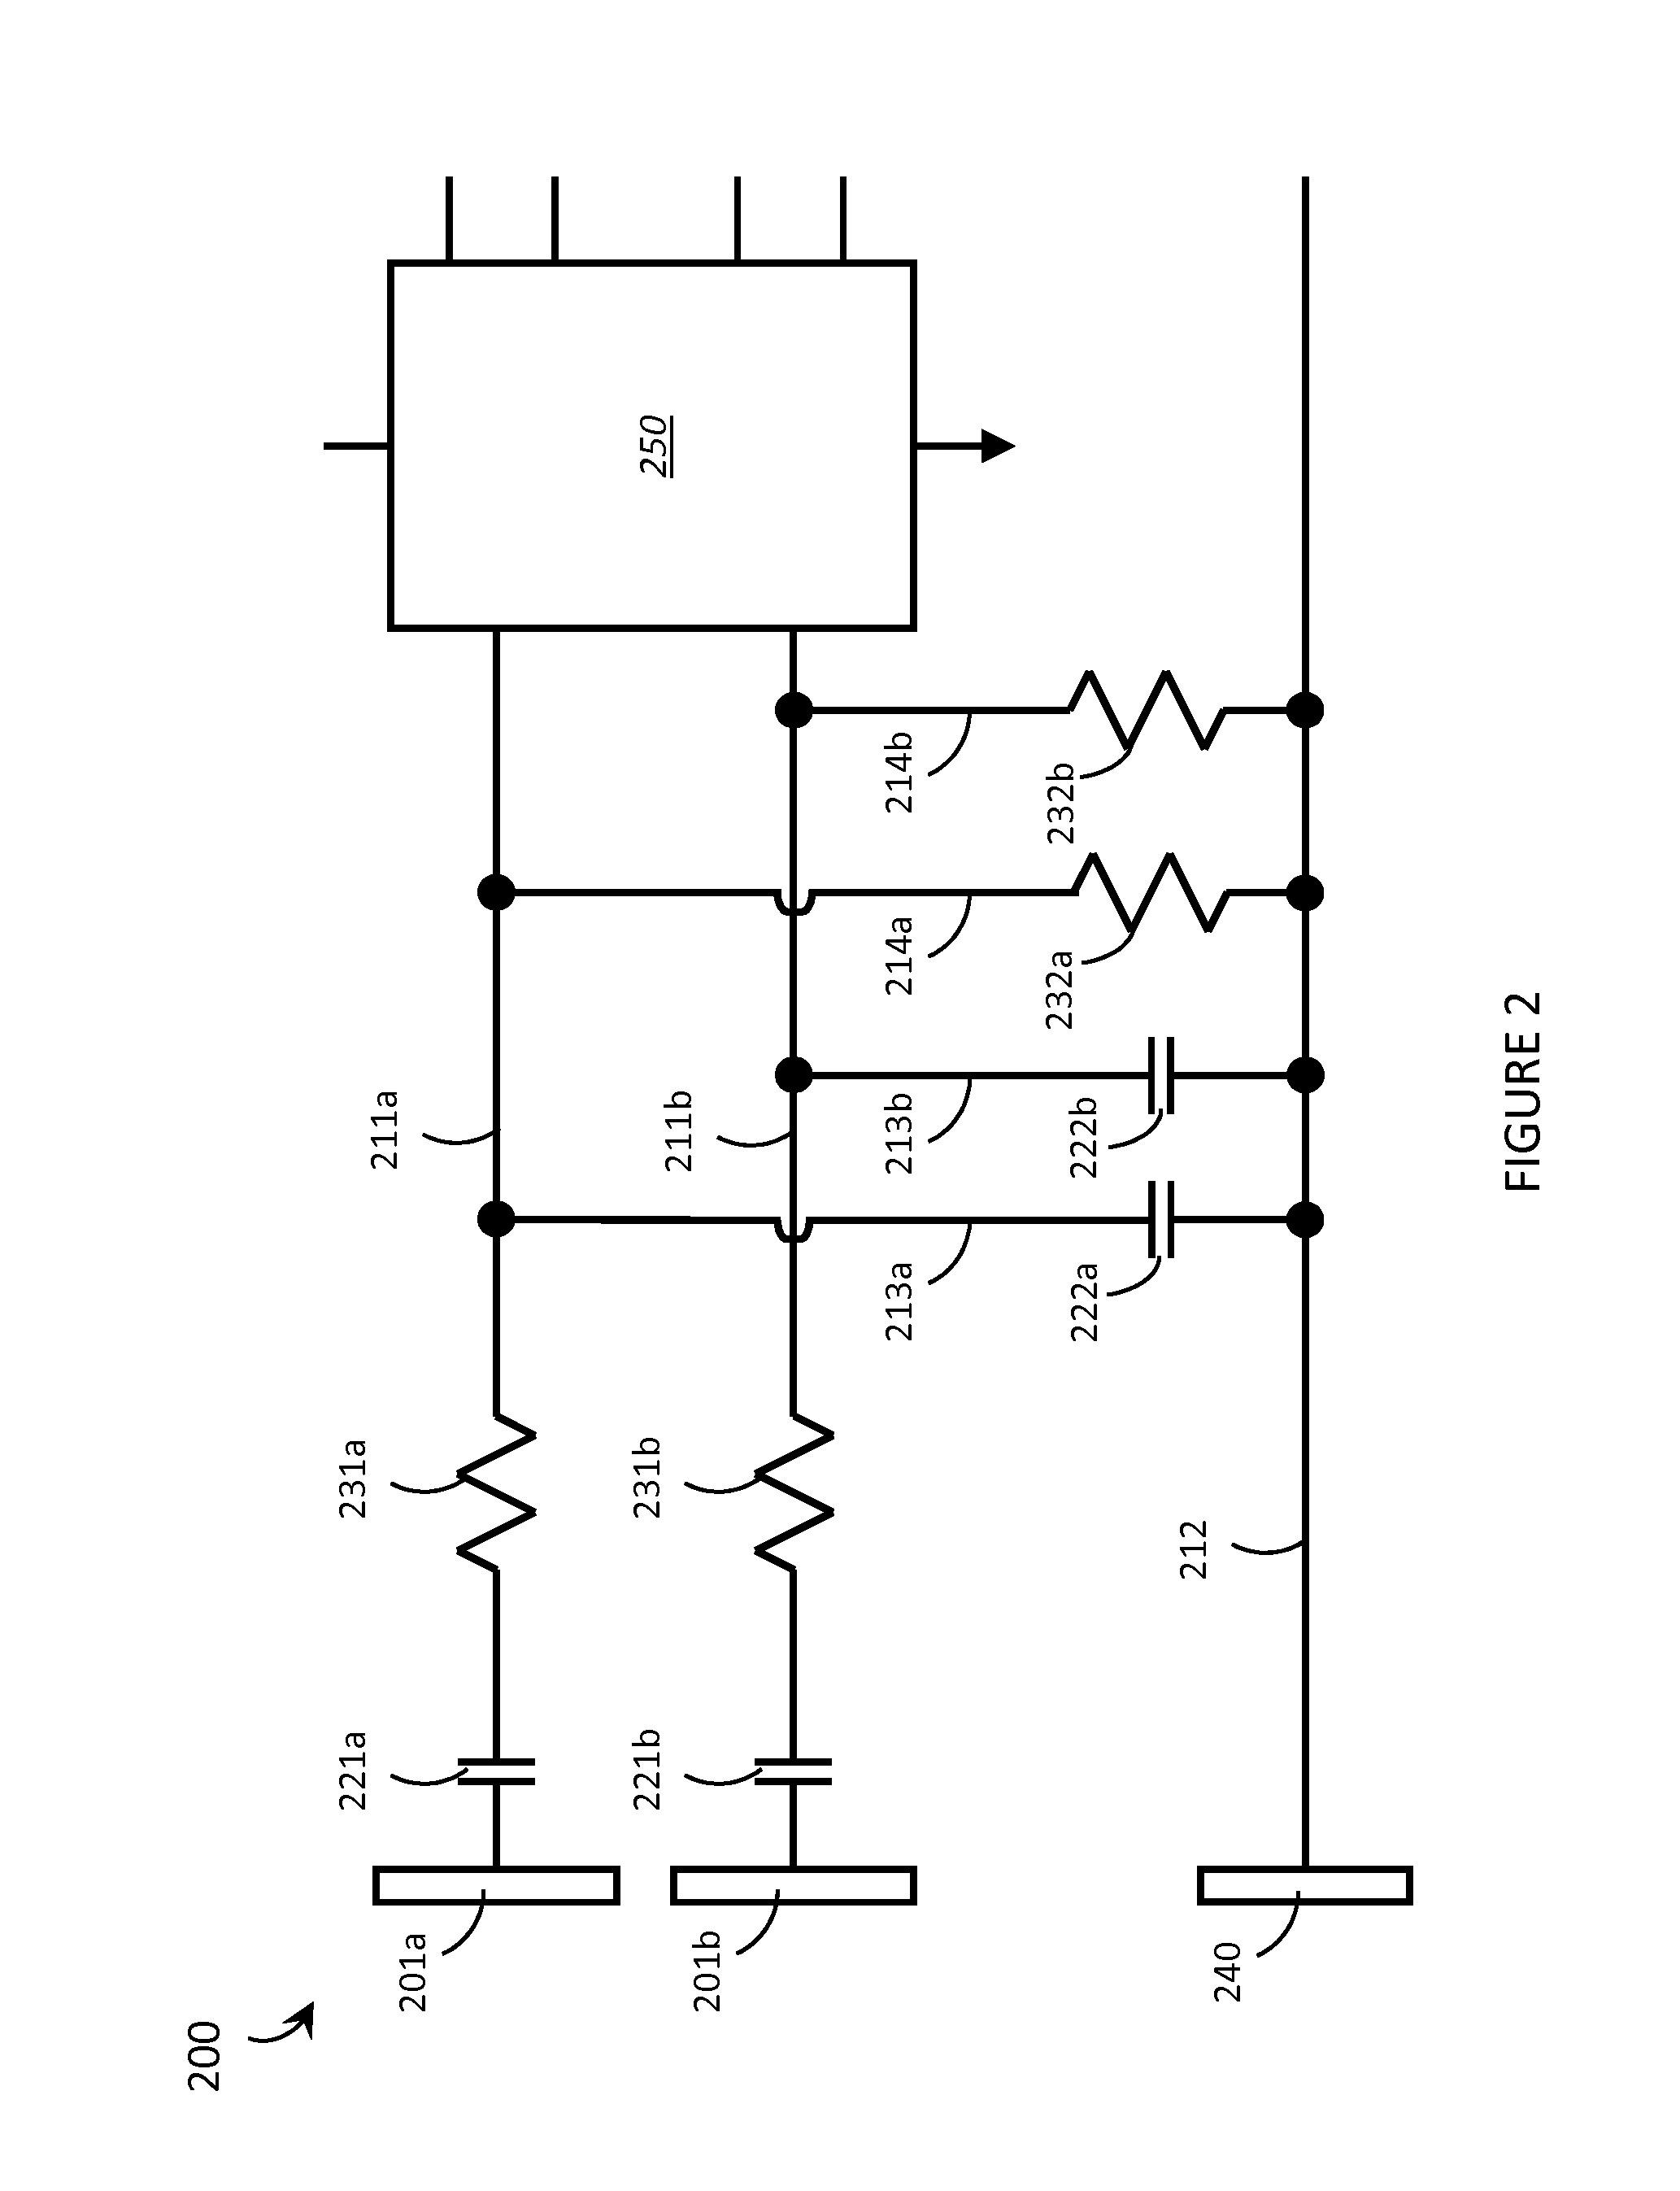 Systems, articles, and methods for electromyography sensors